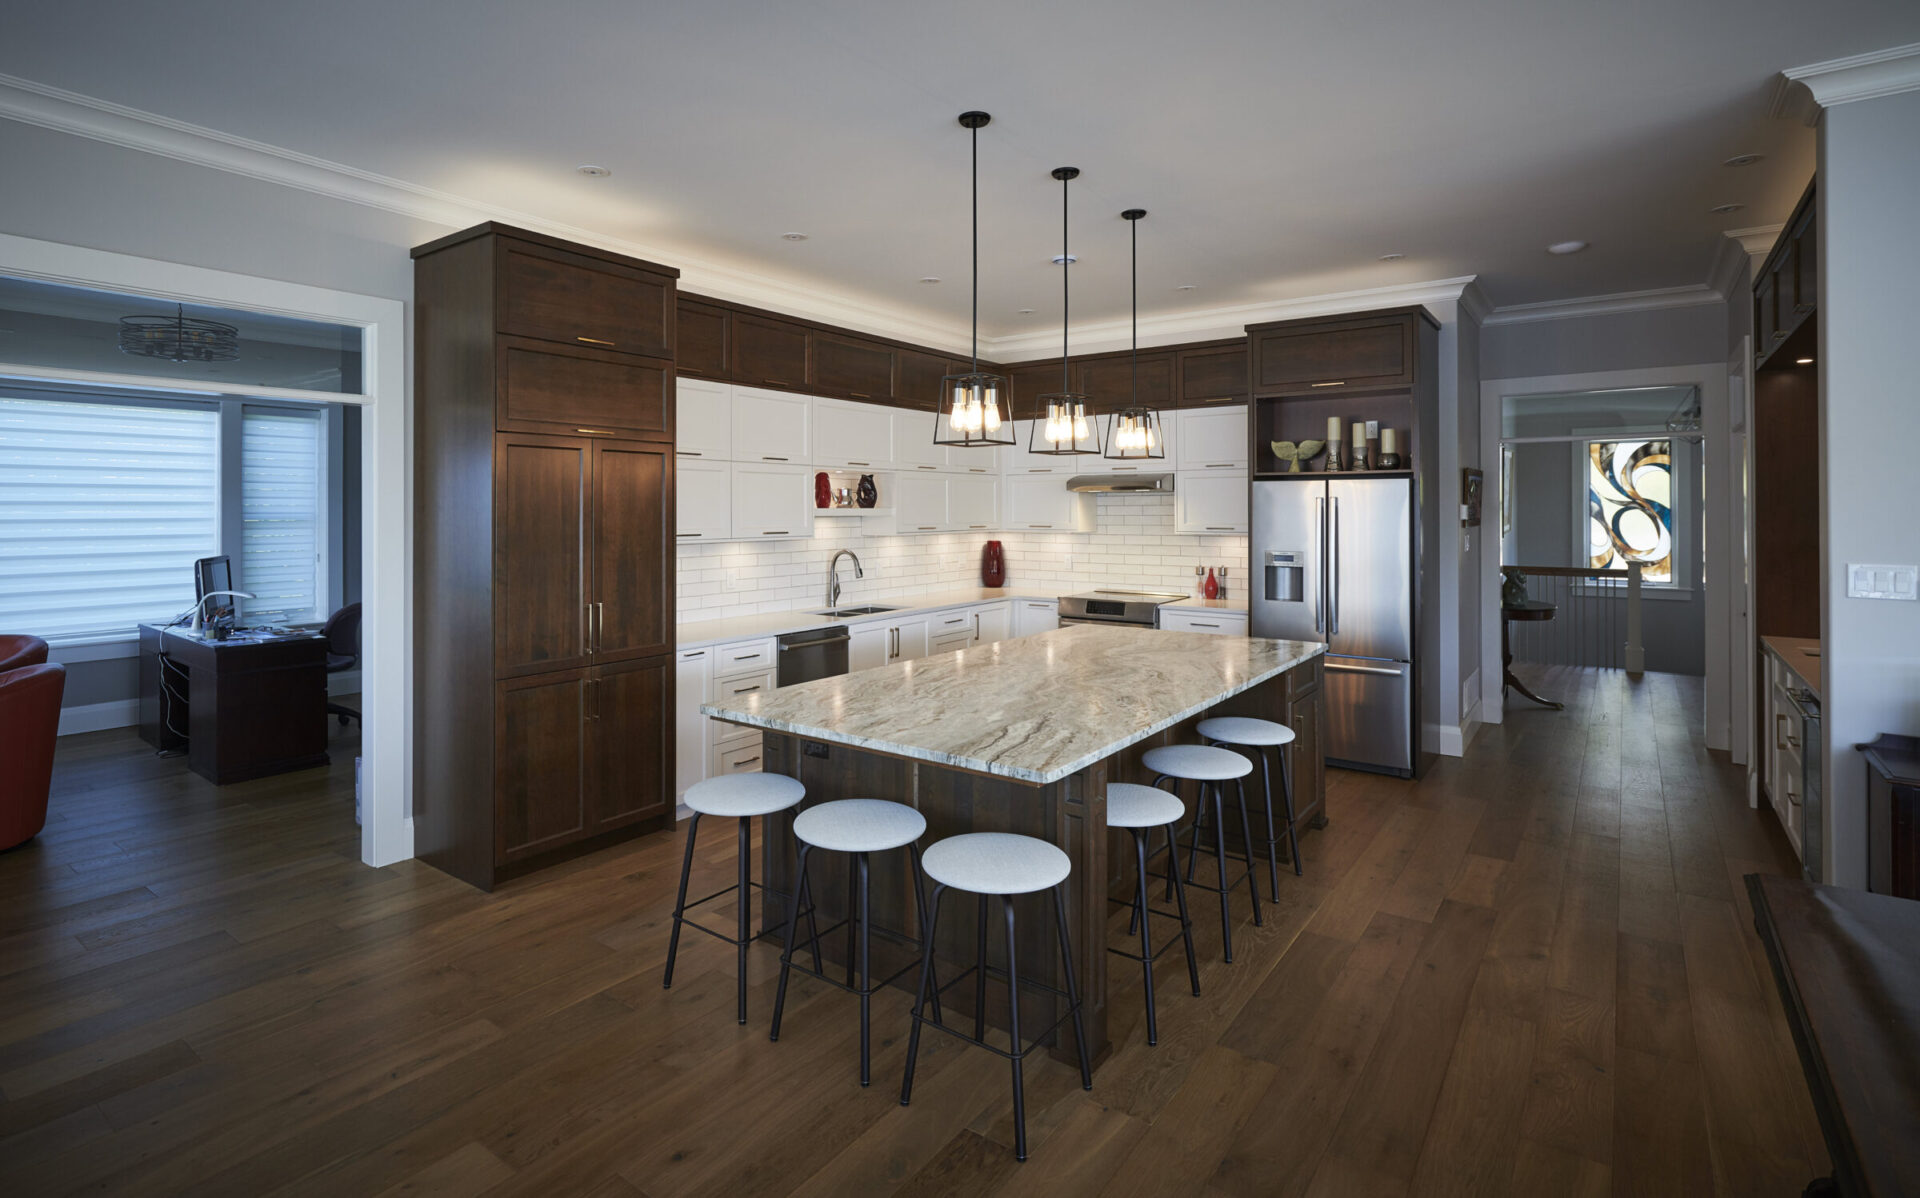 The image shows a modern kitchen with dark wood cabinets, white countertops, stainless steel appliances, an island with bar stools, and pendant lighting.